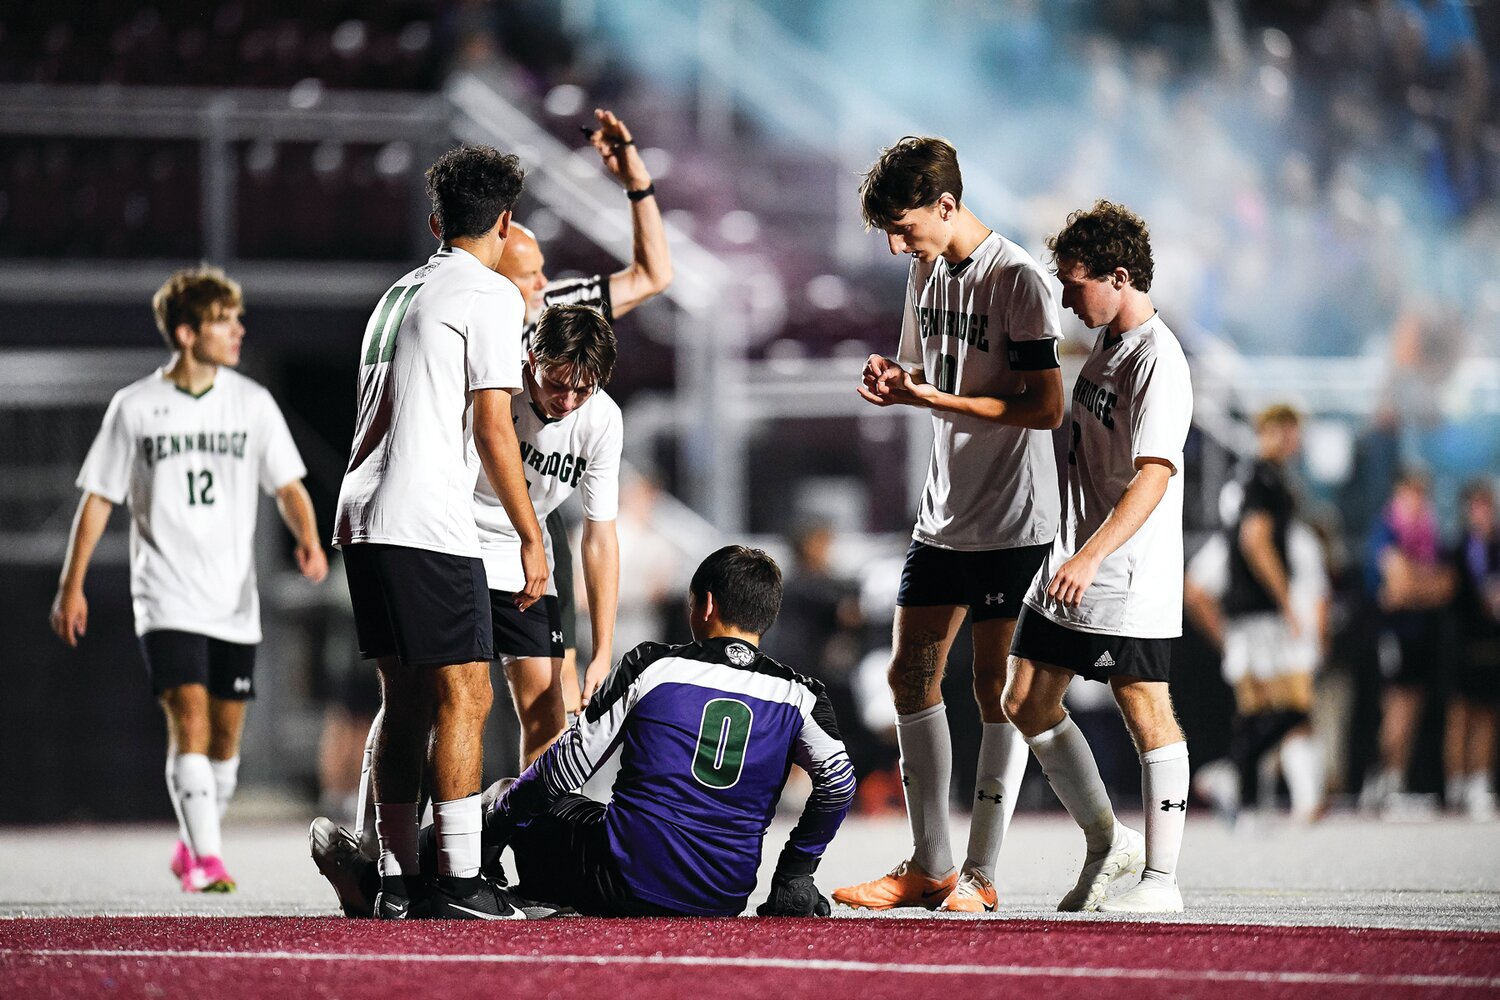 Pennridge goalie Gavin Dimmick is injured in the opening minutes after a goal by FCA. Dimmick would leave the game and return later in the first half.